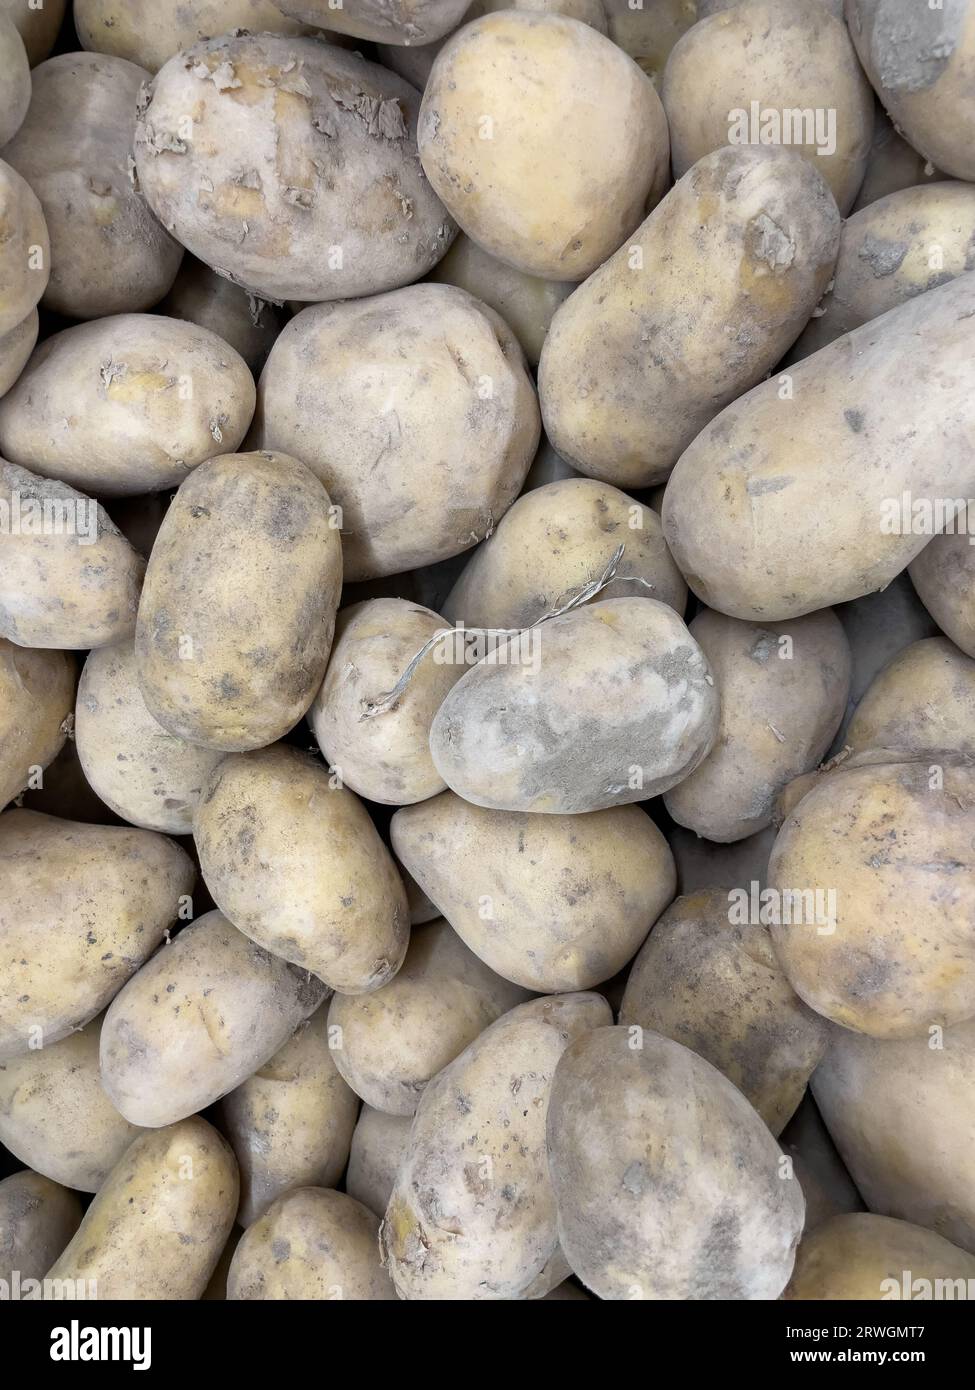 The potato is a starchy food, a tuber of the plant Solanum tuberosum and is a root vegetable native to the Americas. The plant is a perennial in the n Stock Photo